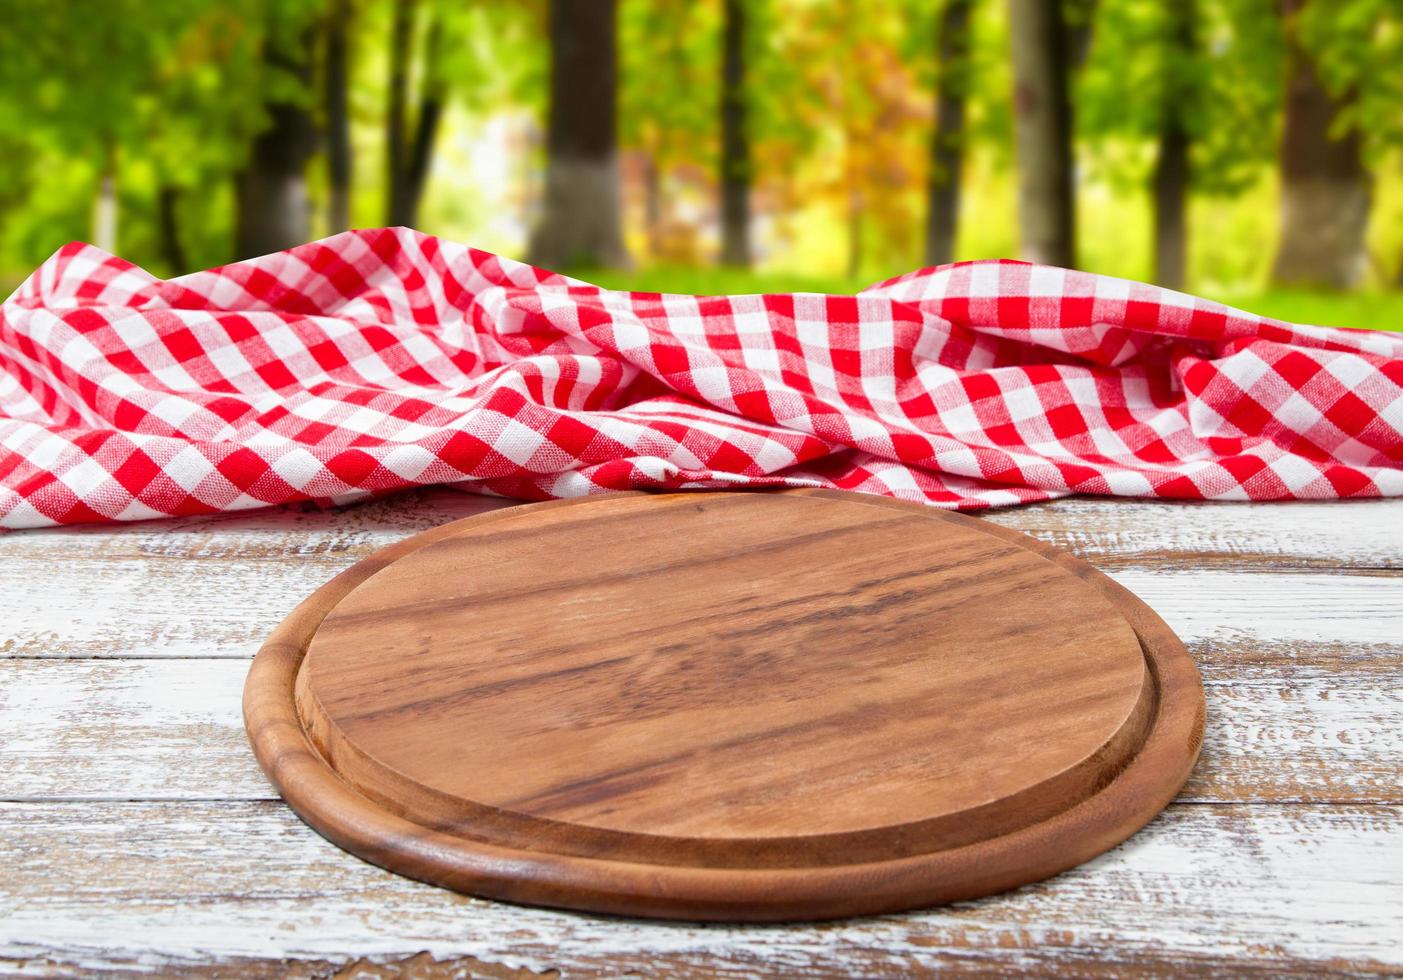 pizza desk checkered tablecloth on a wooden table on blurred forest background photo